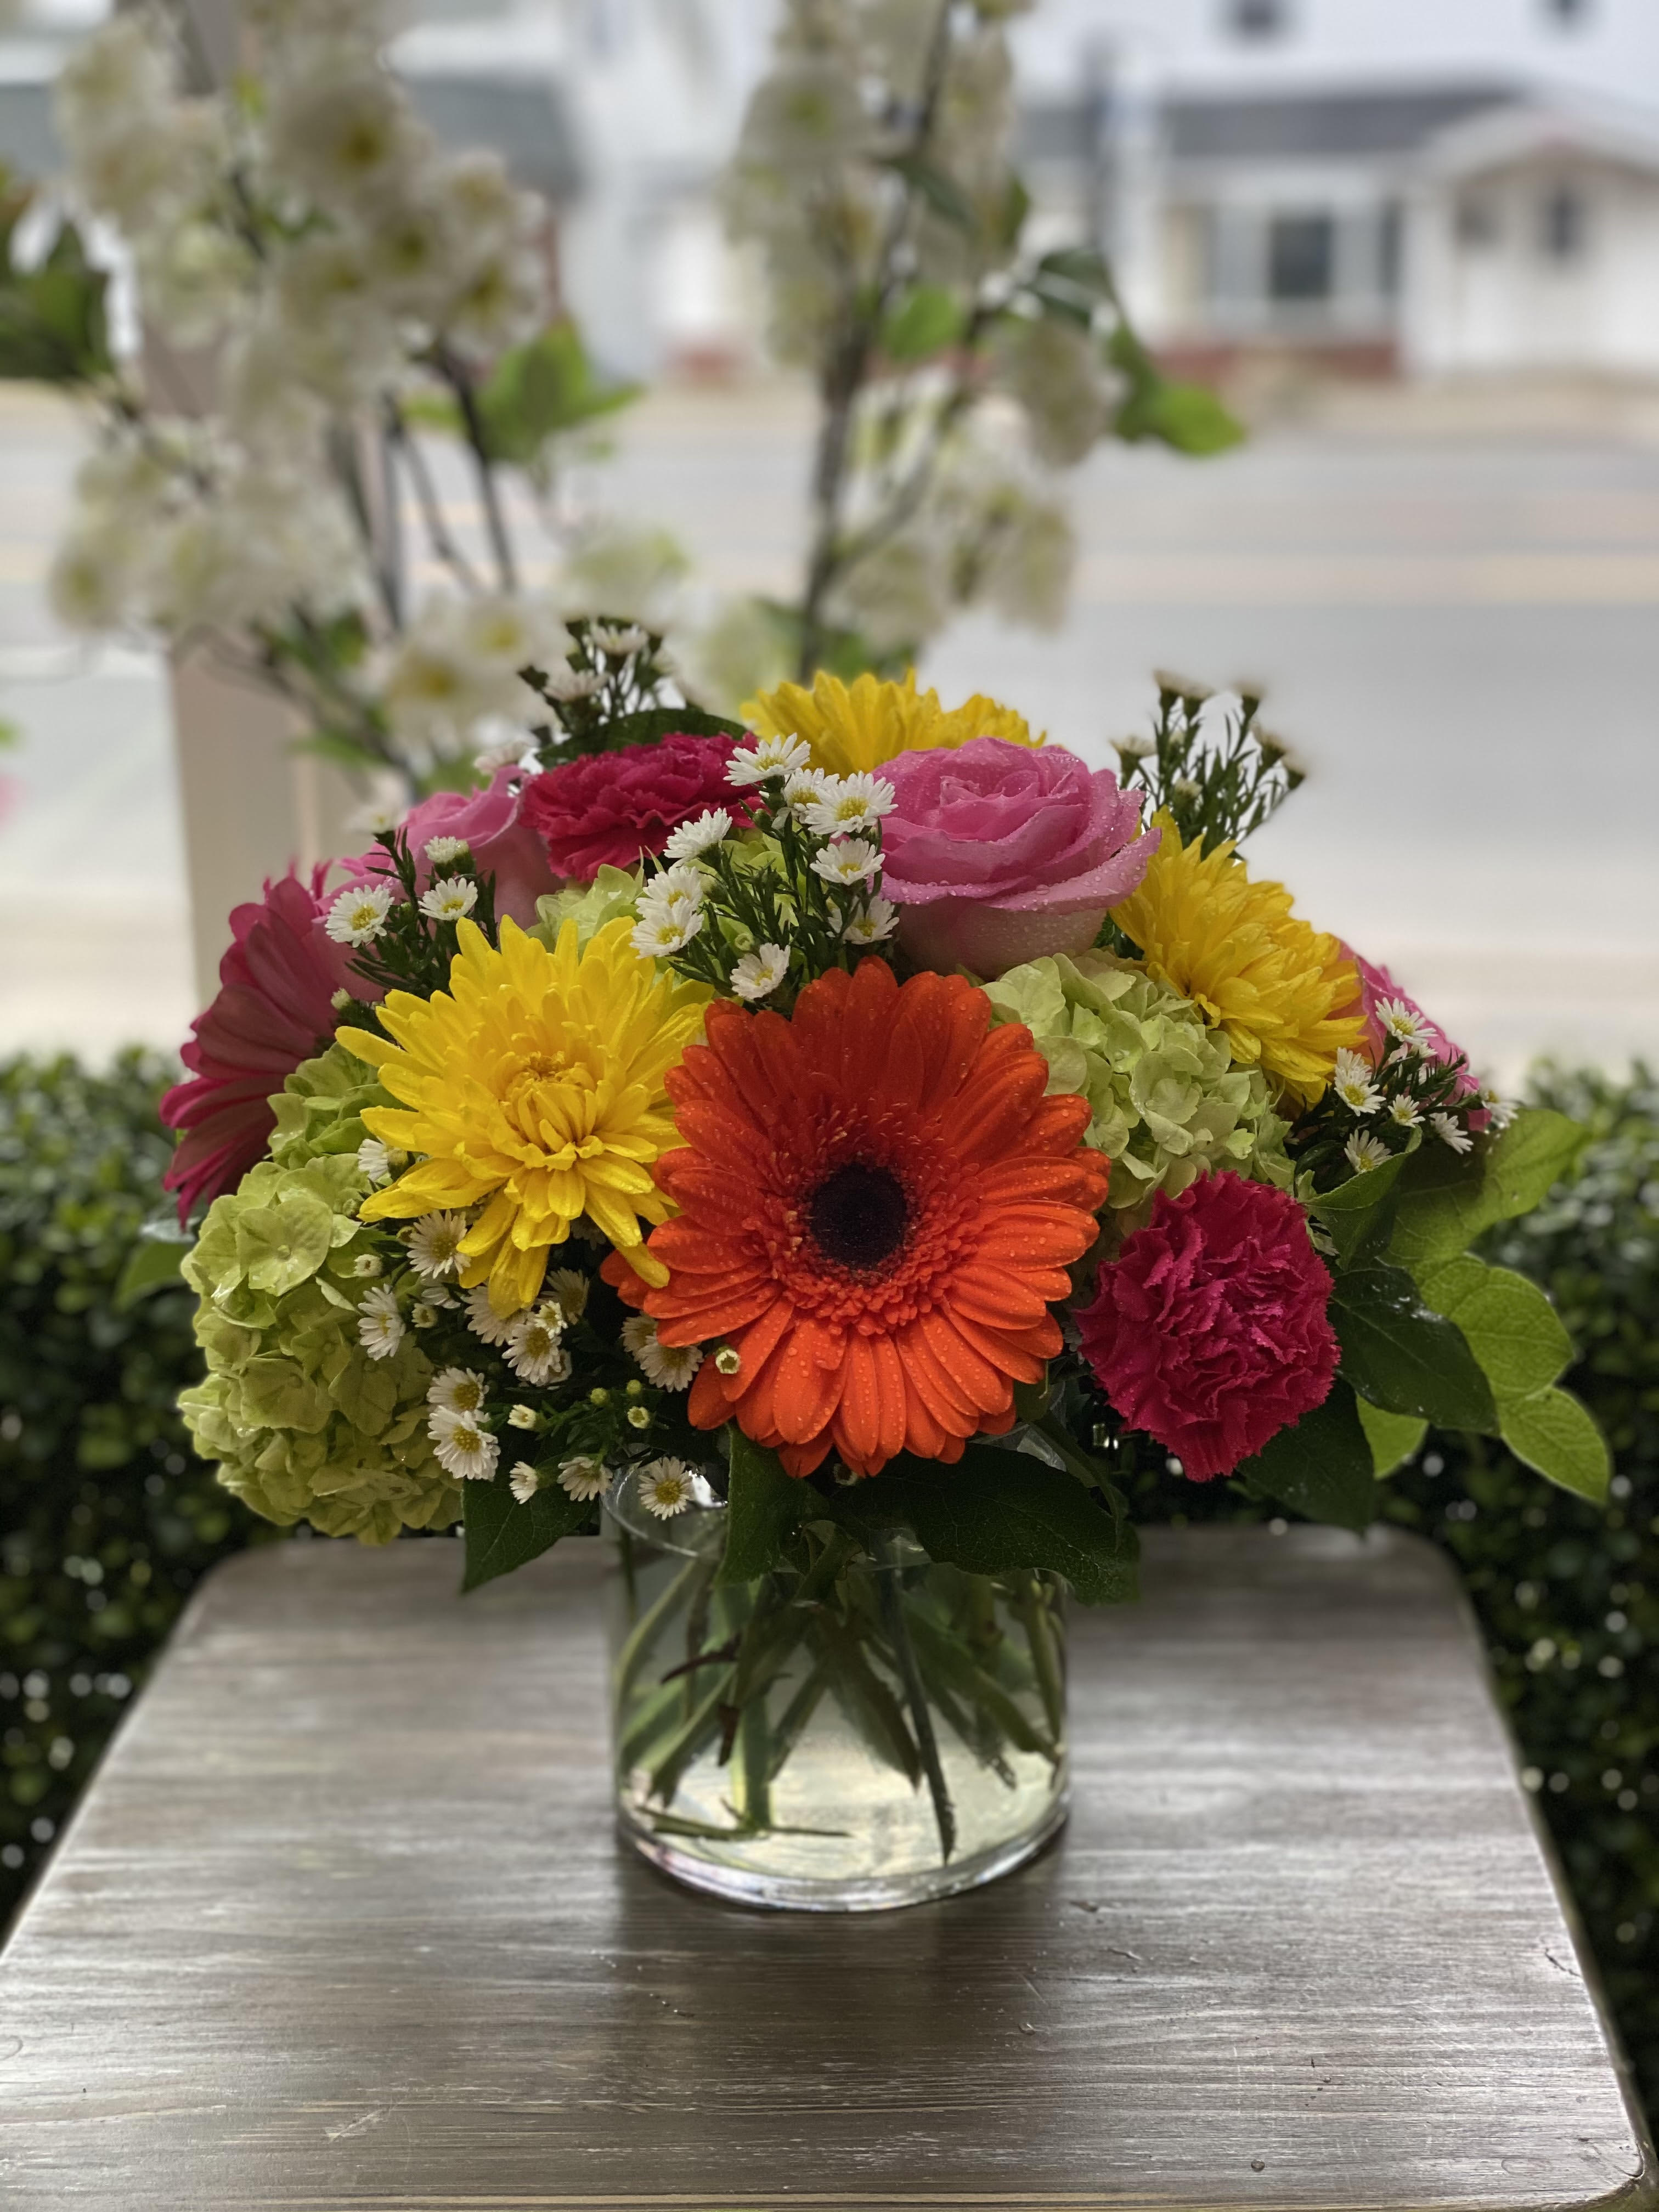 Pop of Spring - Orange gerbera, pink roses, hot pink carnations, yellow cremone, green mini hydrangea, pink gerbera daisy, white monte casino asters in a clear glass cylinder